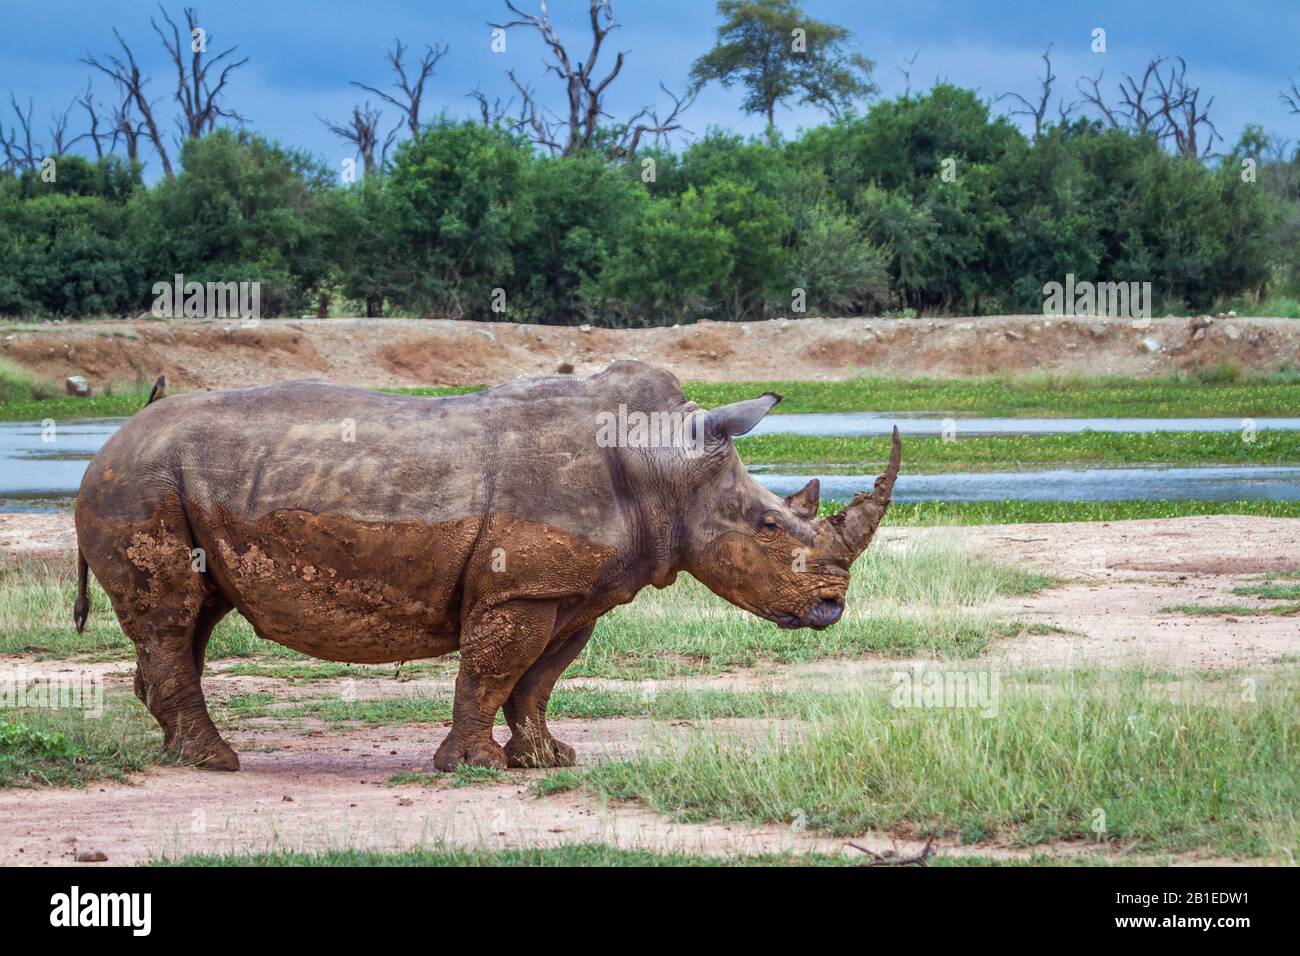 Southern white rhinoceros (Ceratotherium simum simum) in wide angle view in Hlane royal National park, Swaziland scenery Stock Photo